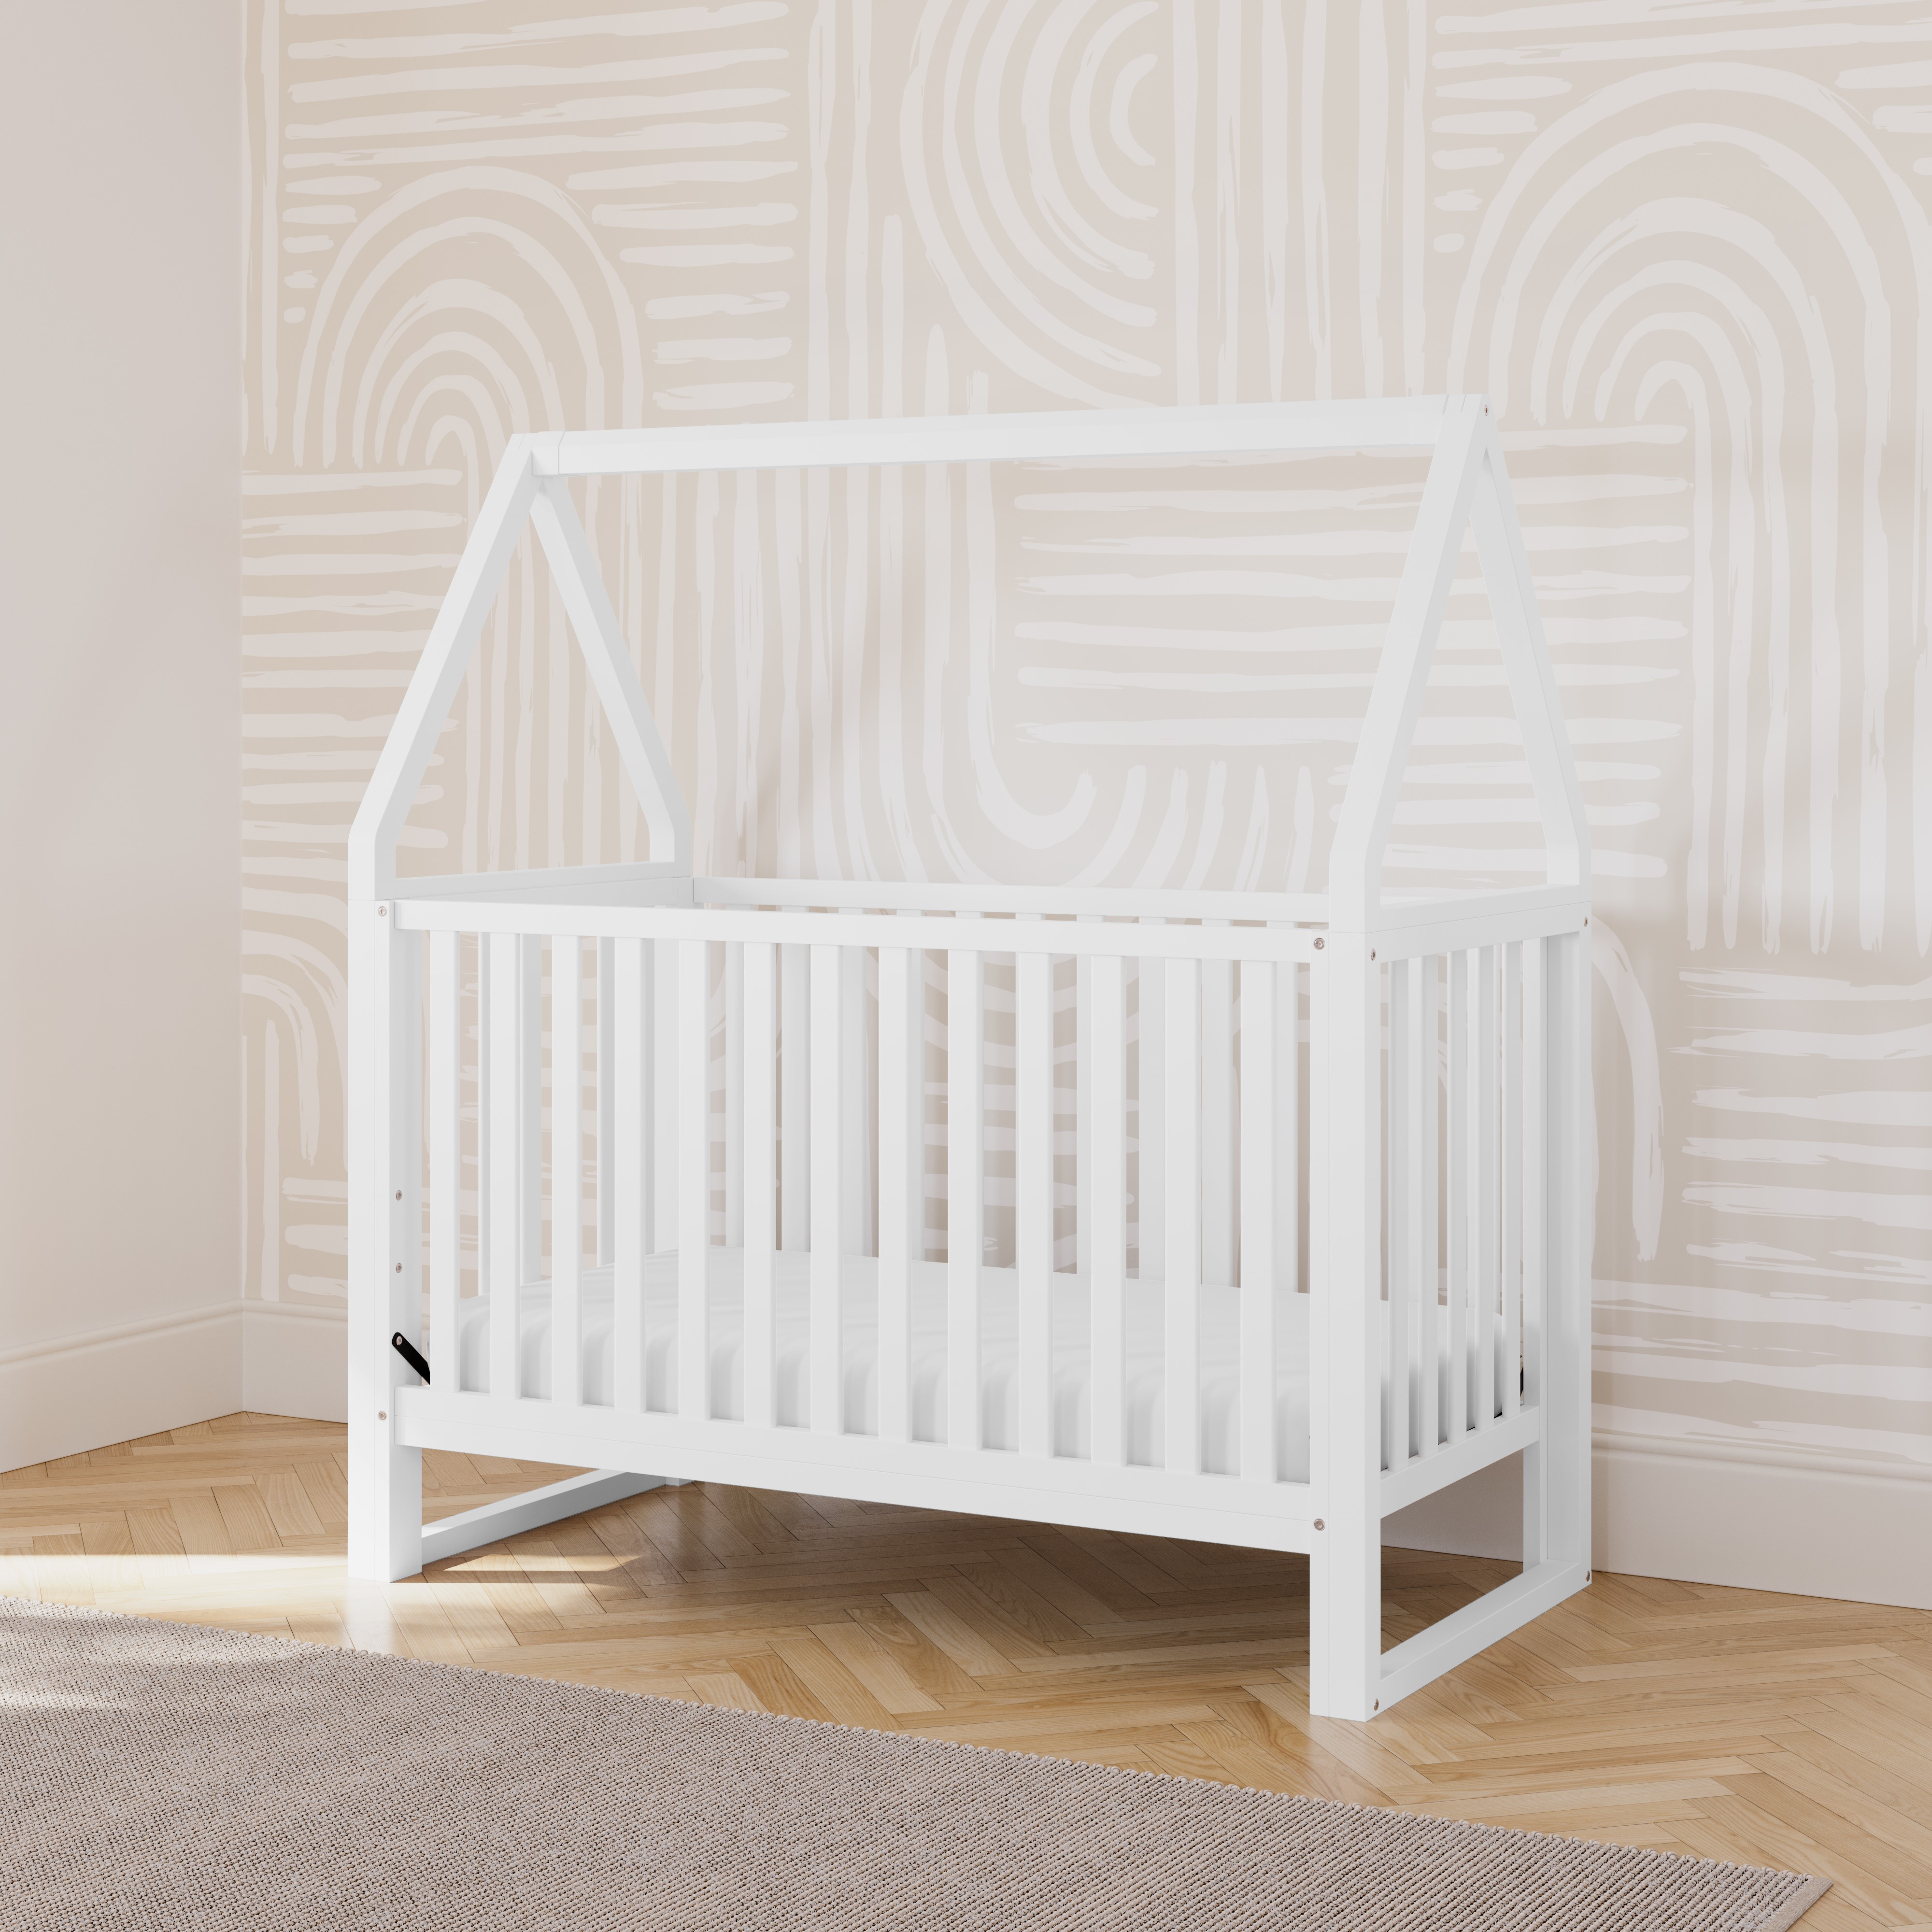 Storkcraft Orchard 5-in-1 Convertible Baby Crib, White - image 3 of 17